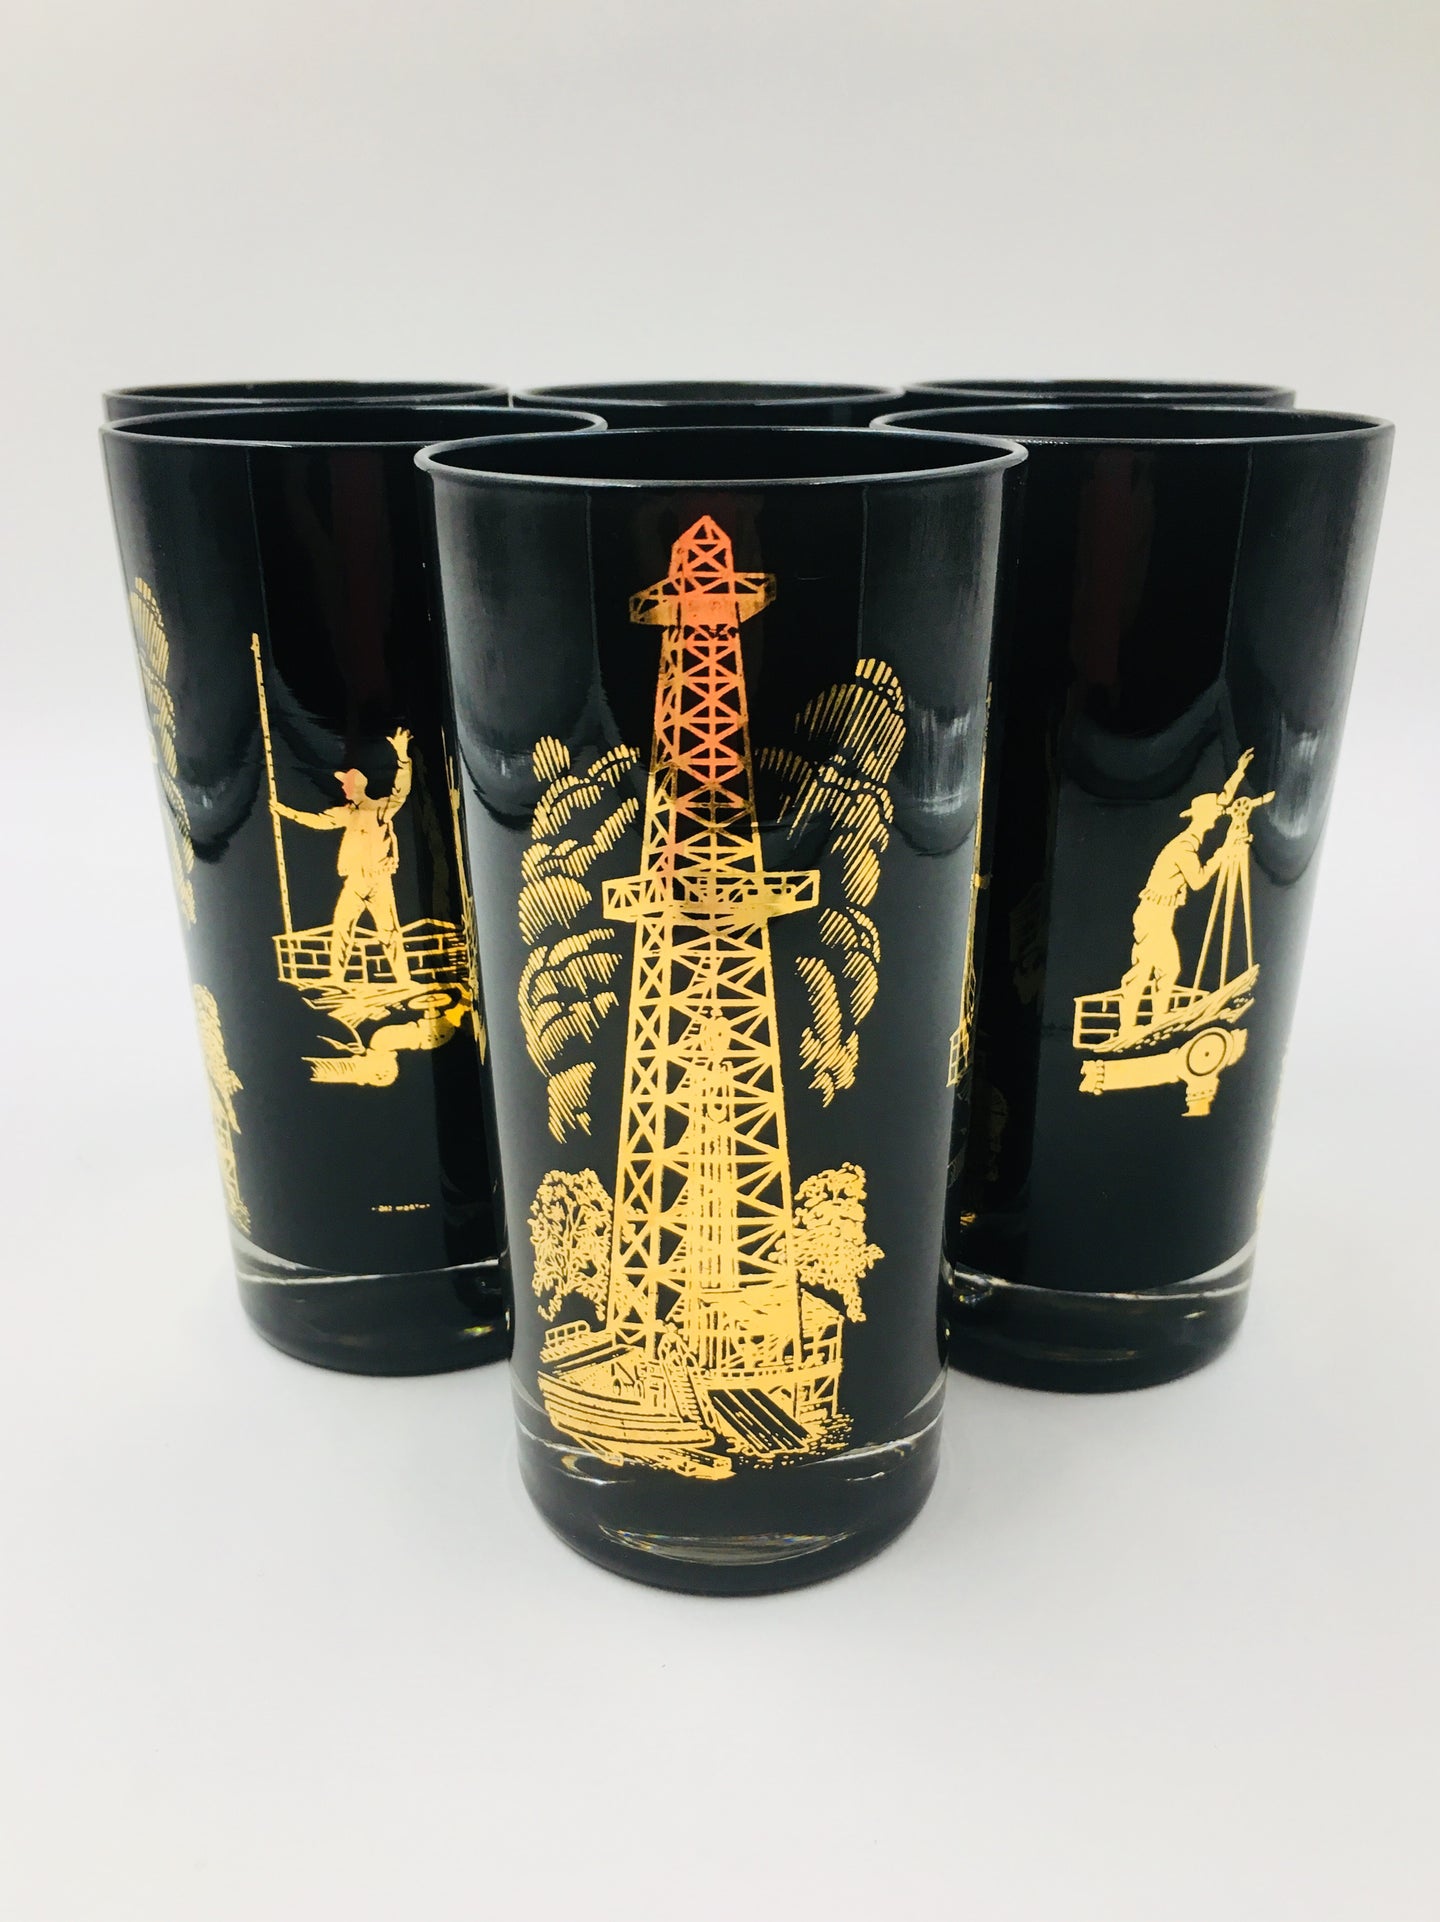 Vintage Black and 22k Gold Highball Glasses with Oil Derricks and Surveyors